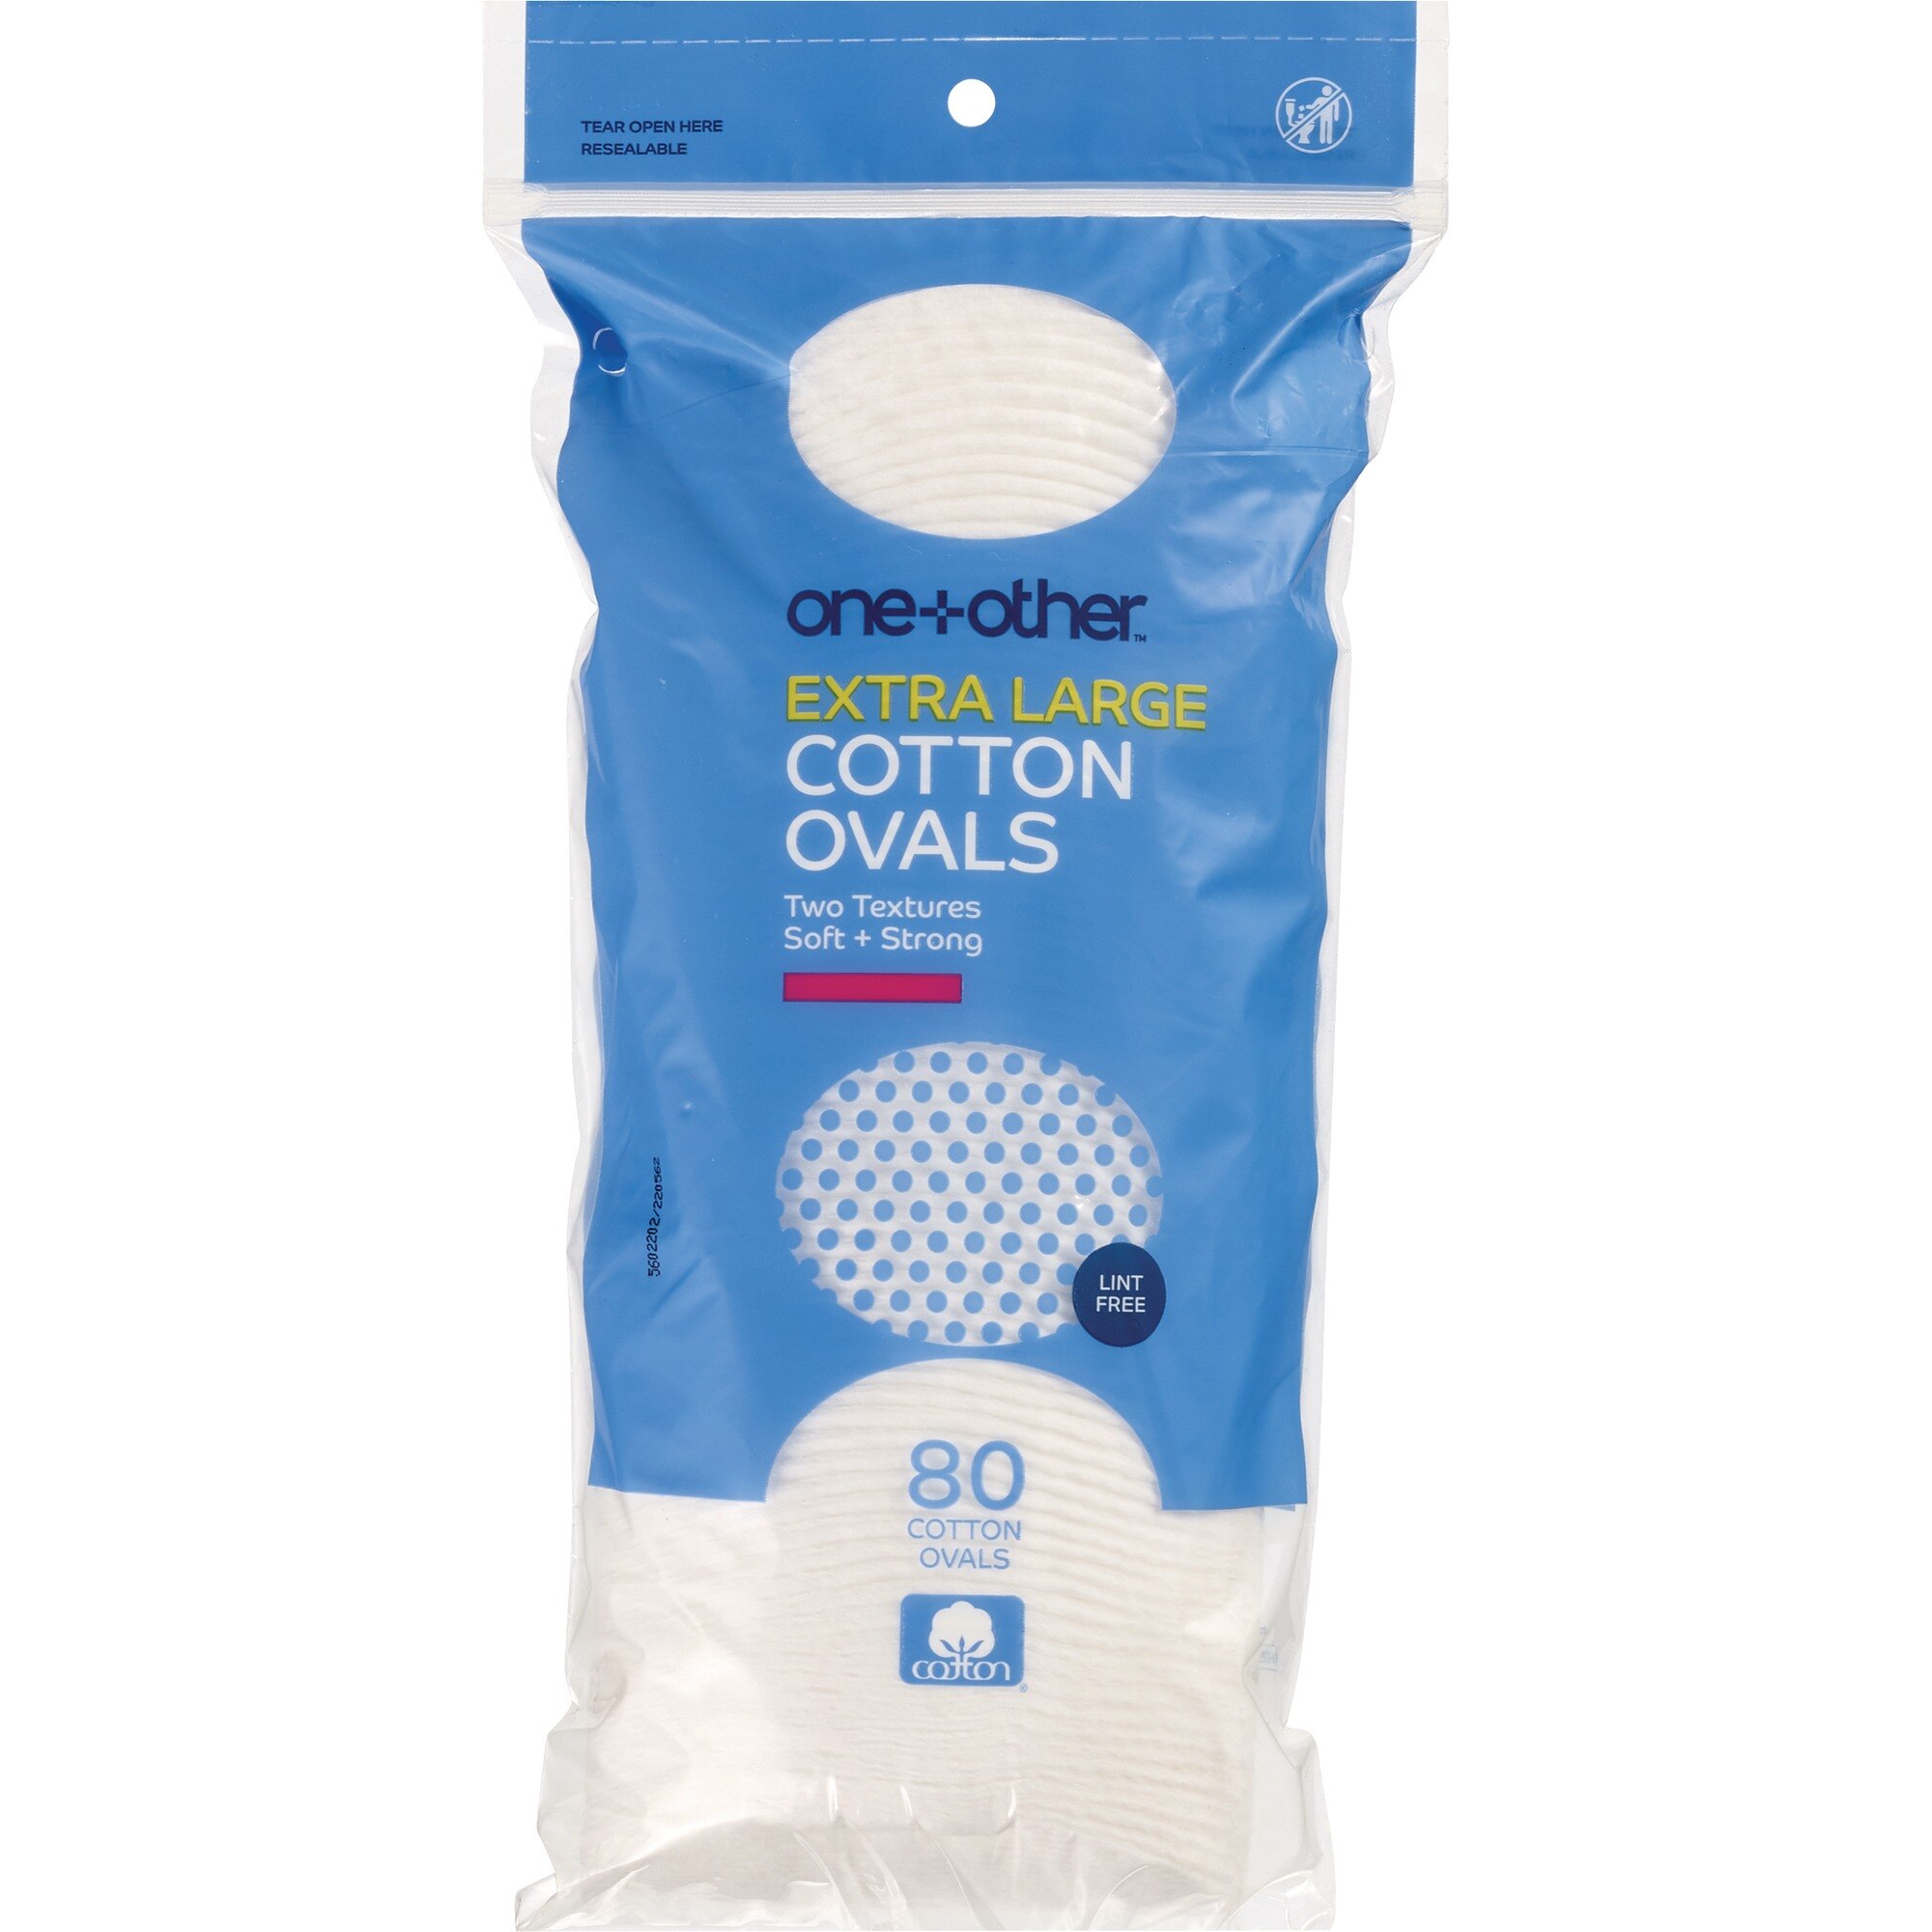 one+other Extra Large Premium Cotton Ovals, 80CT